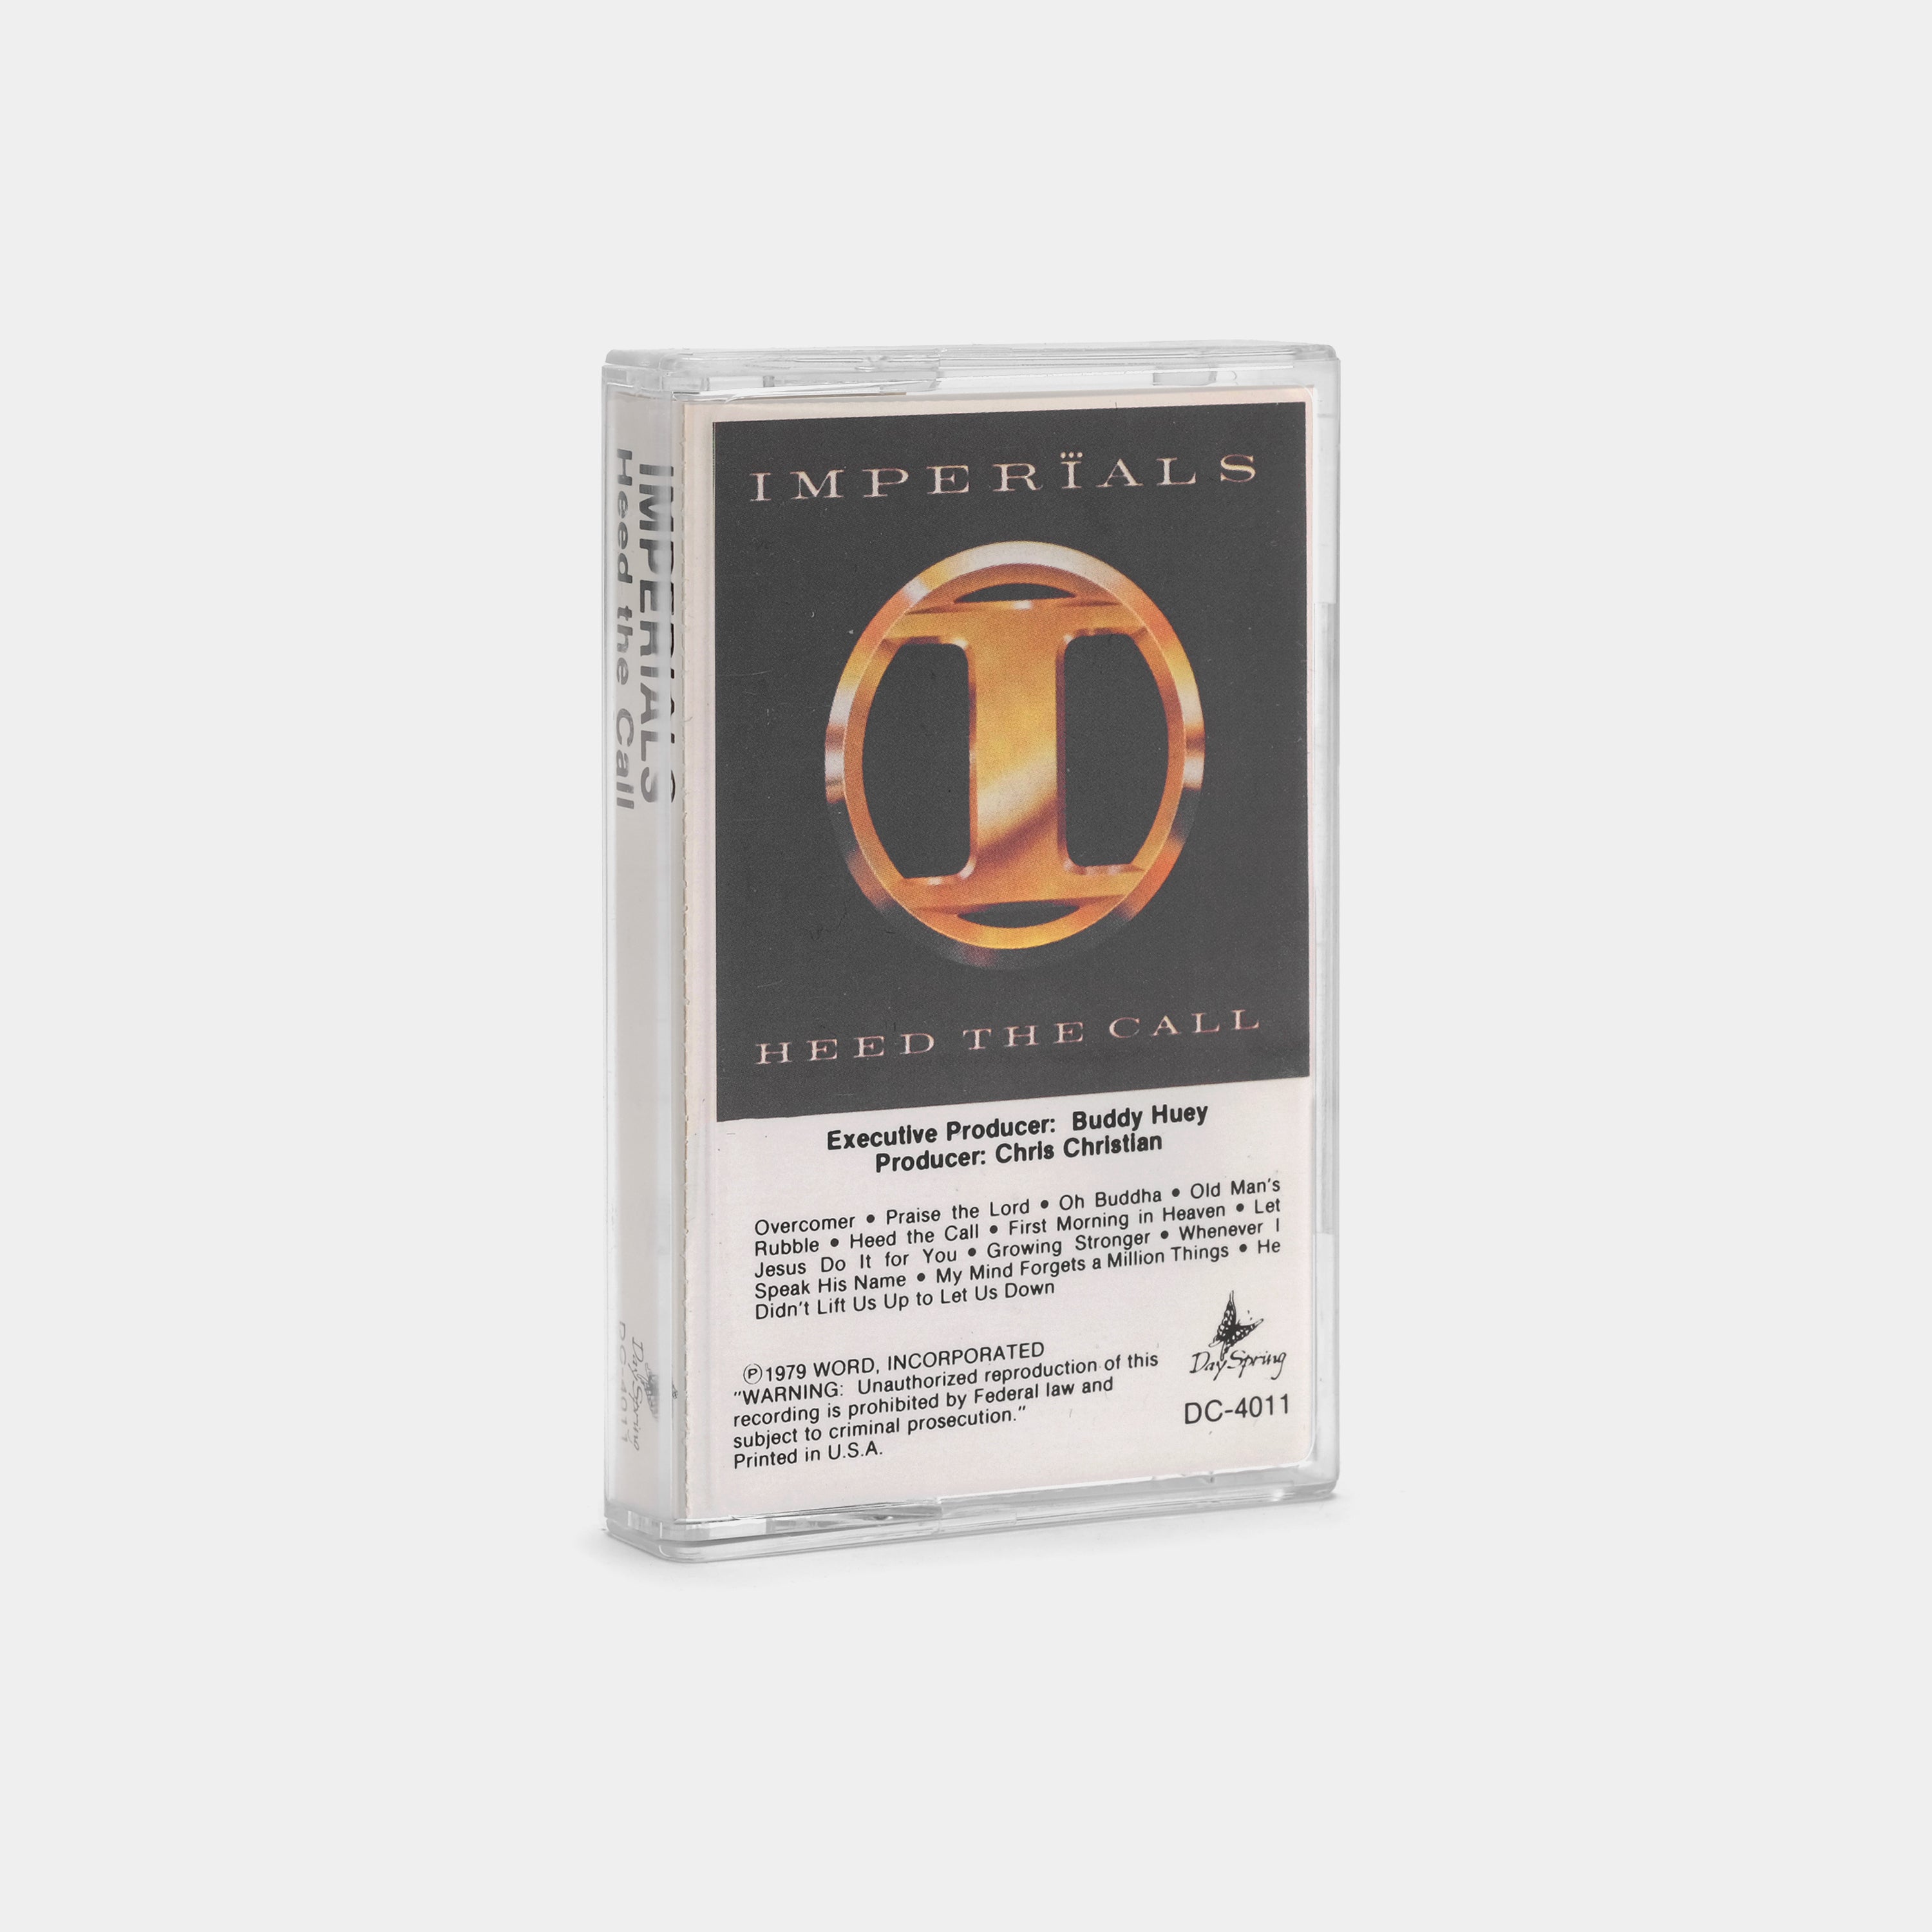 Imperials - Heed The Call Cassette Tape